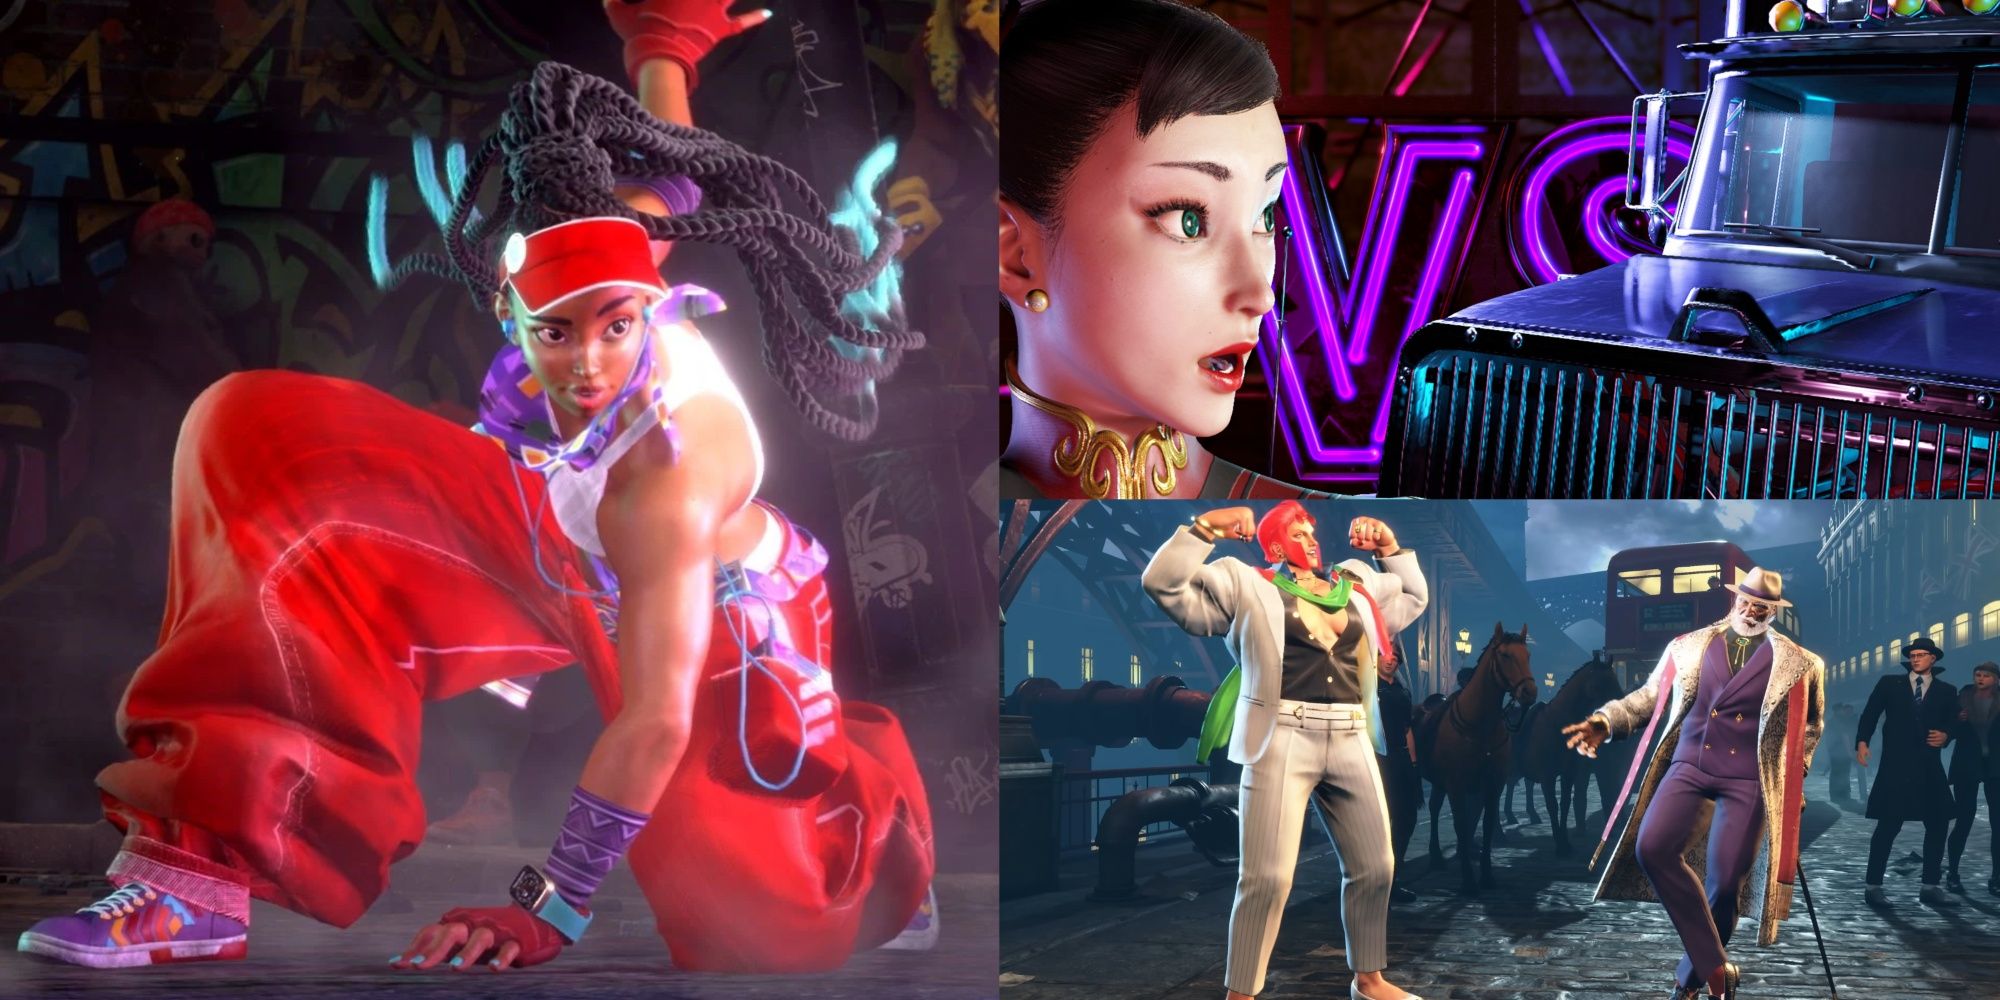 Cammy's Classic Outfit Should Never Have Been Brought Back To Street Fighter